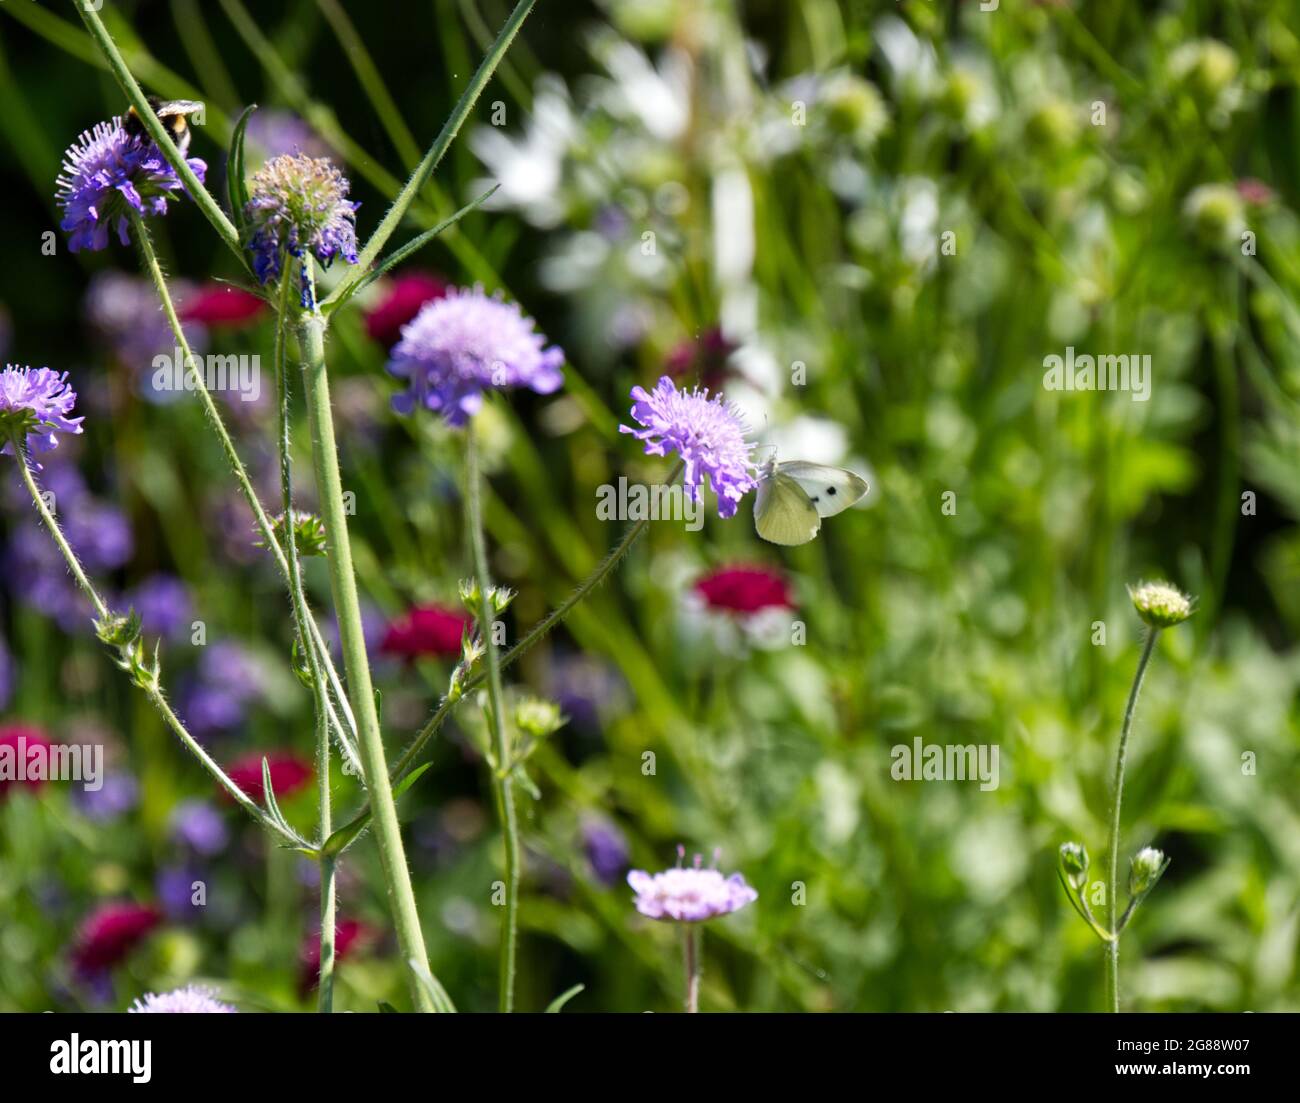 Cabbage white butterfly ( Pieris rapae ) on summer flower of  scabious (Knautia arvensis) flower July UK Stock Photo